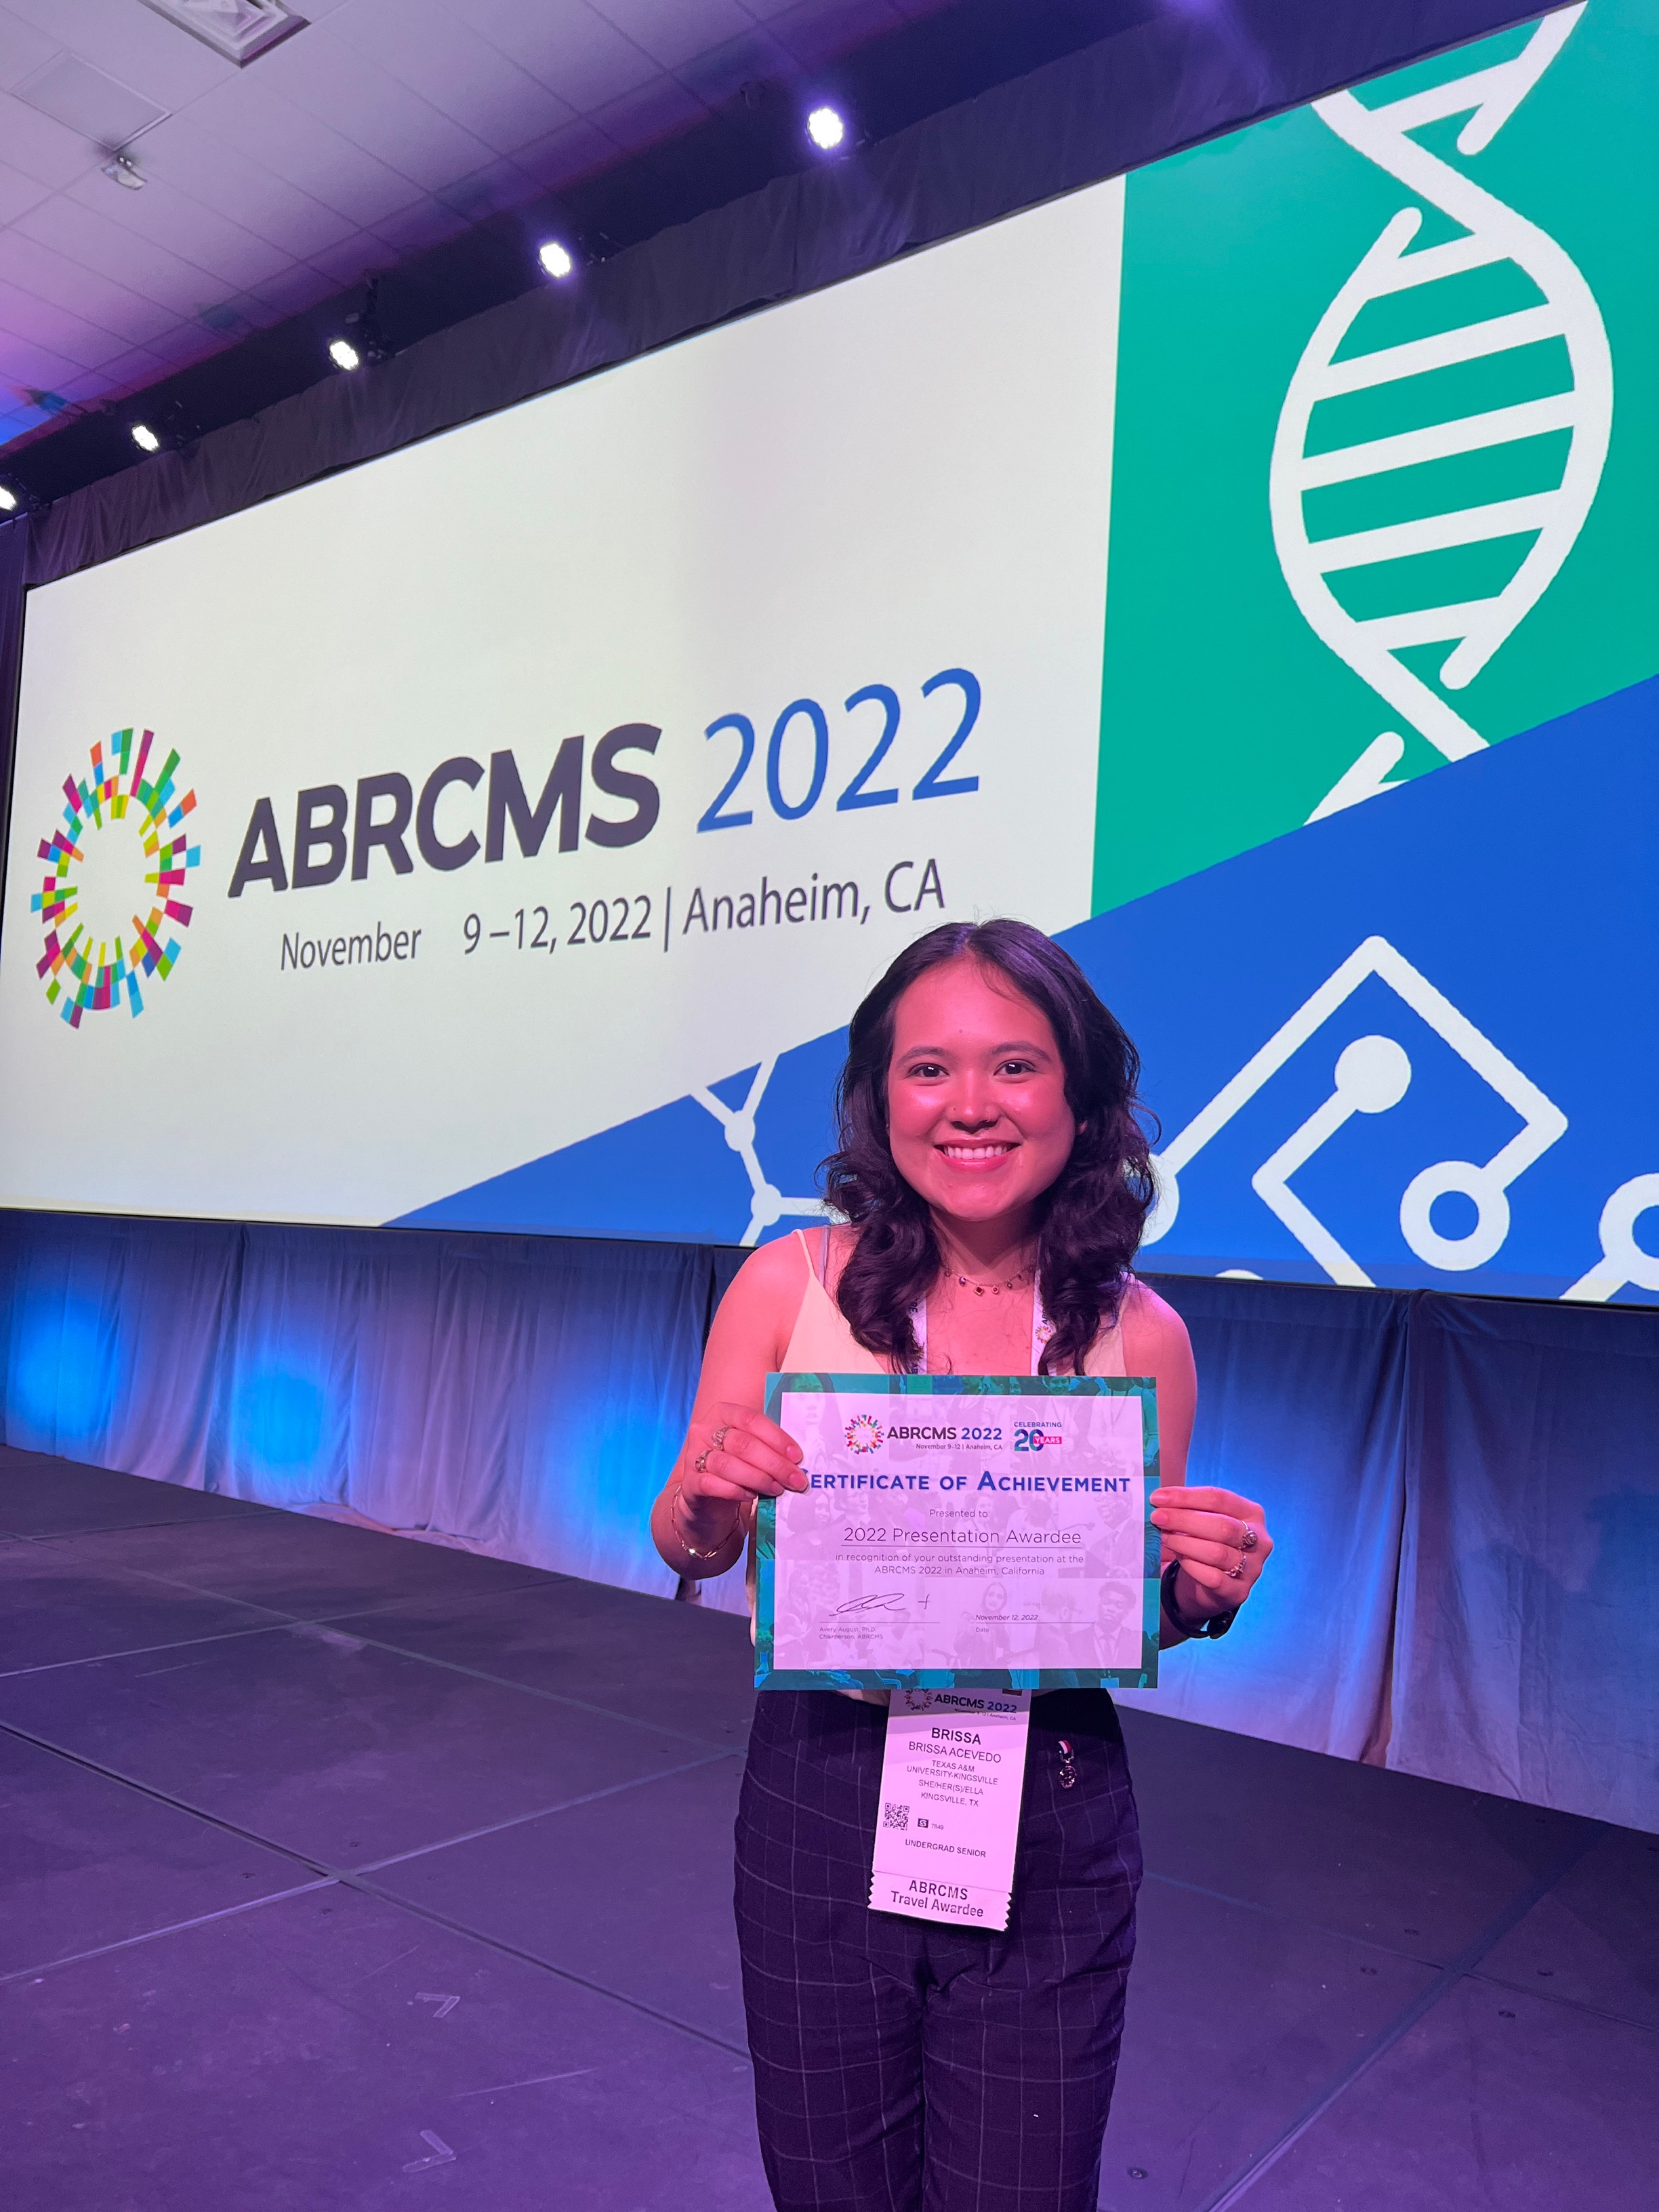 TAMUK senior and McNair scholar Brissa Acevedo was honored for her research presentation at the 2022 ABRCMS conference.